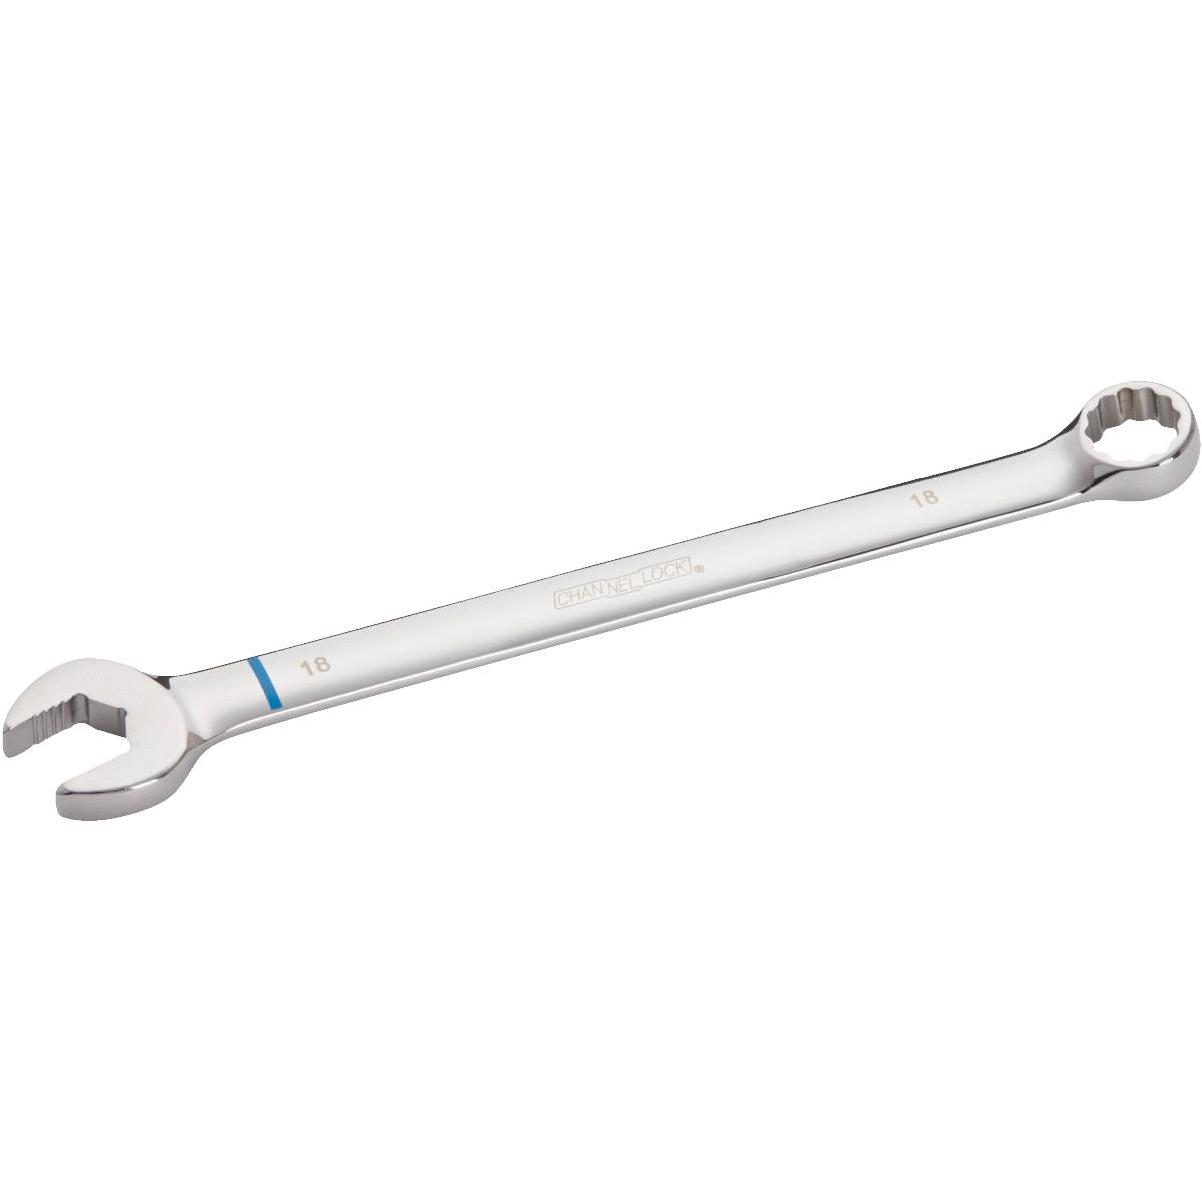 Channellock Combination Wrench 1-1/16 in.